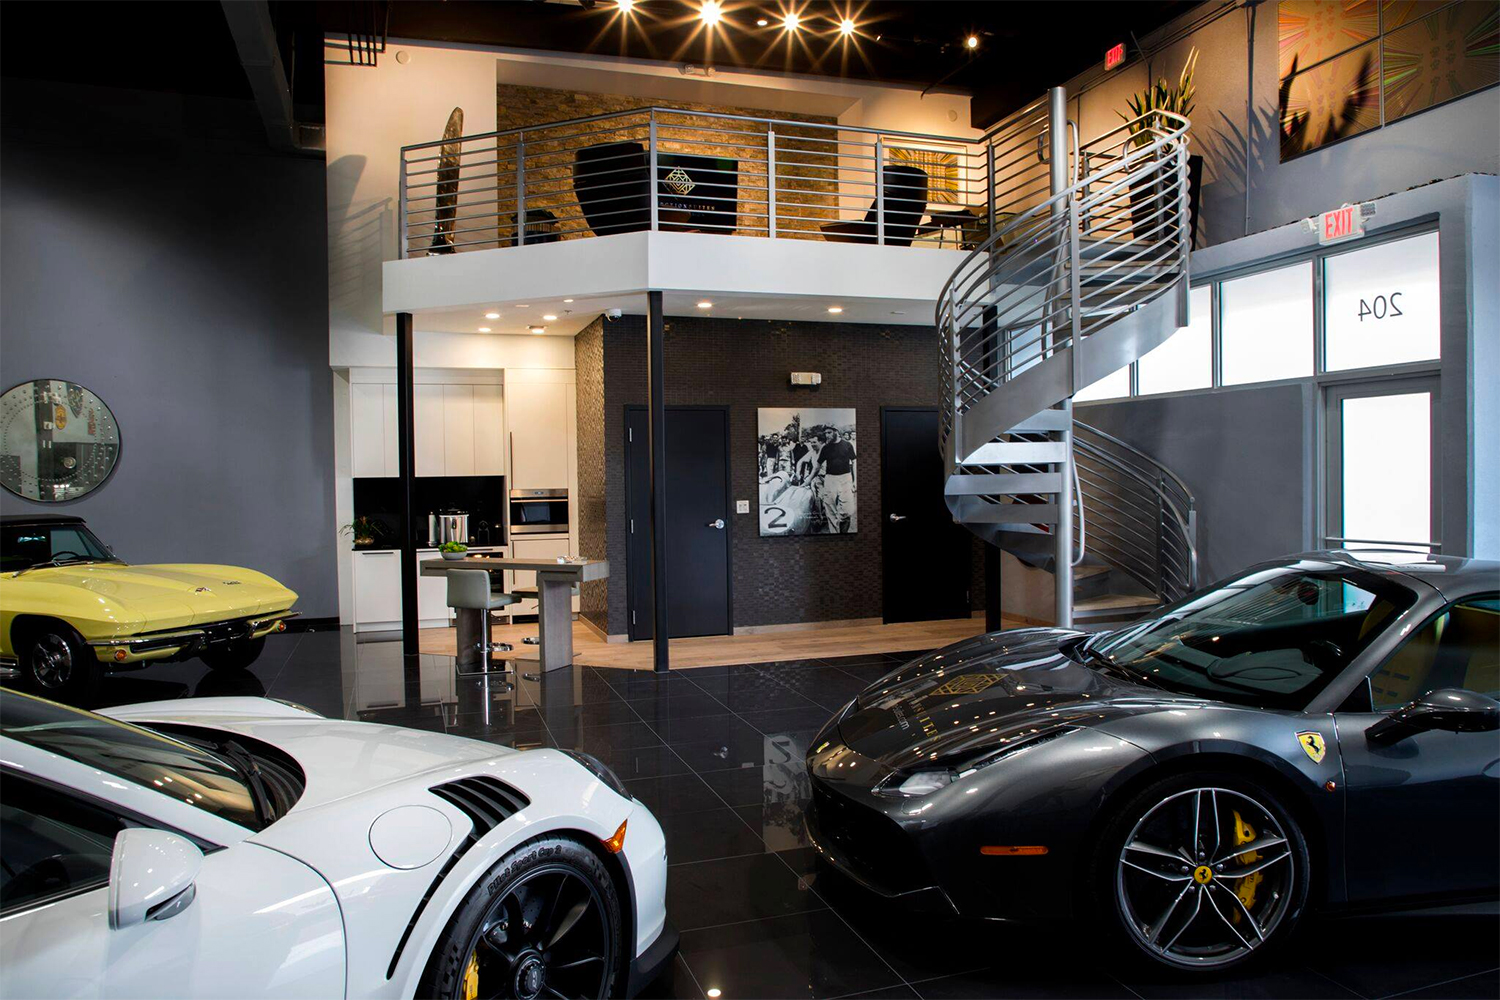 Collection Suites Offers Luxury 'Condos' Just for Storing Your Car ...